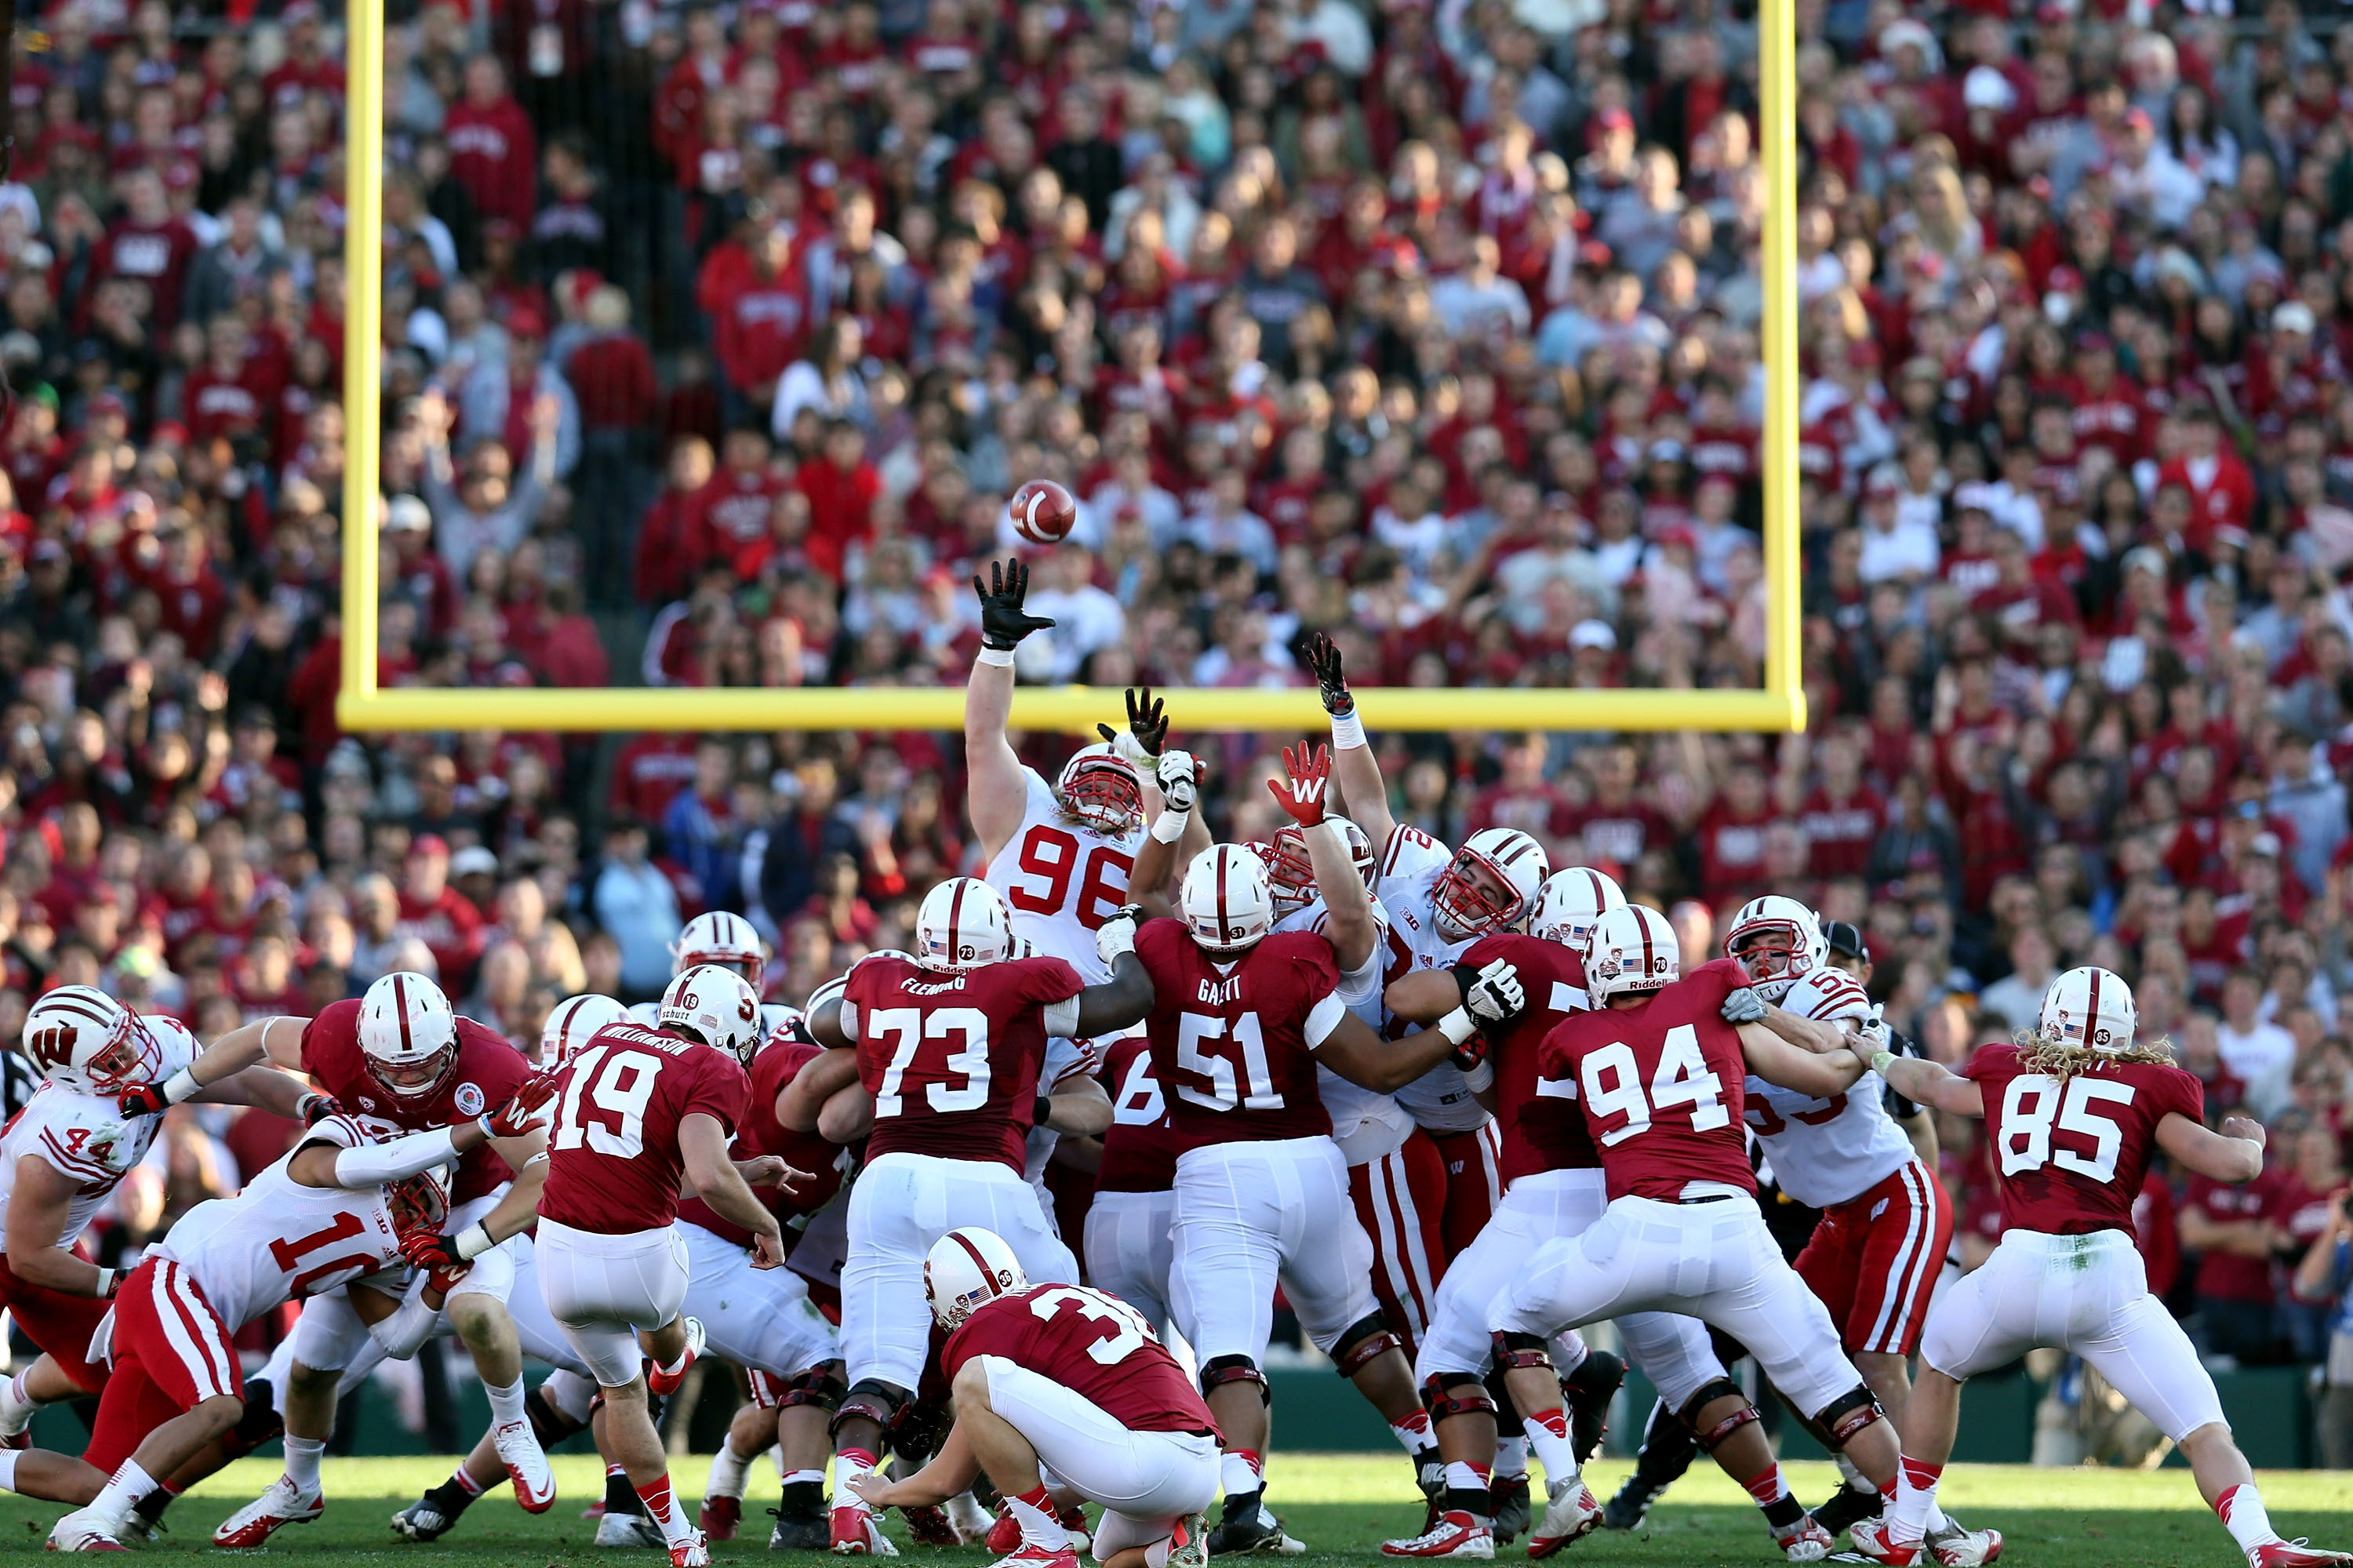 What Is The Longest Field Goal Kicked In College Football?